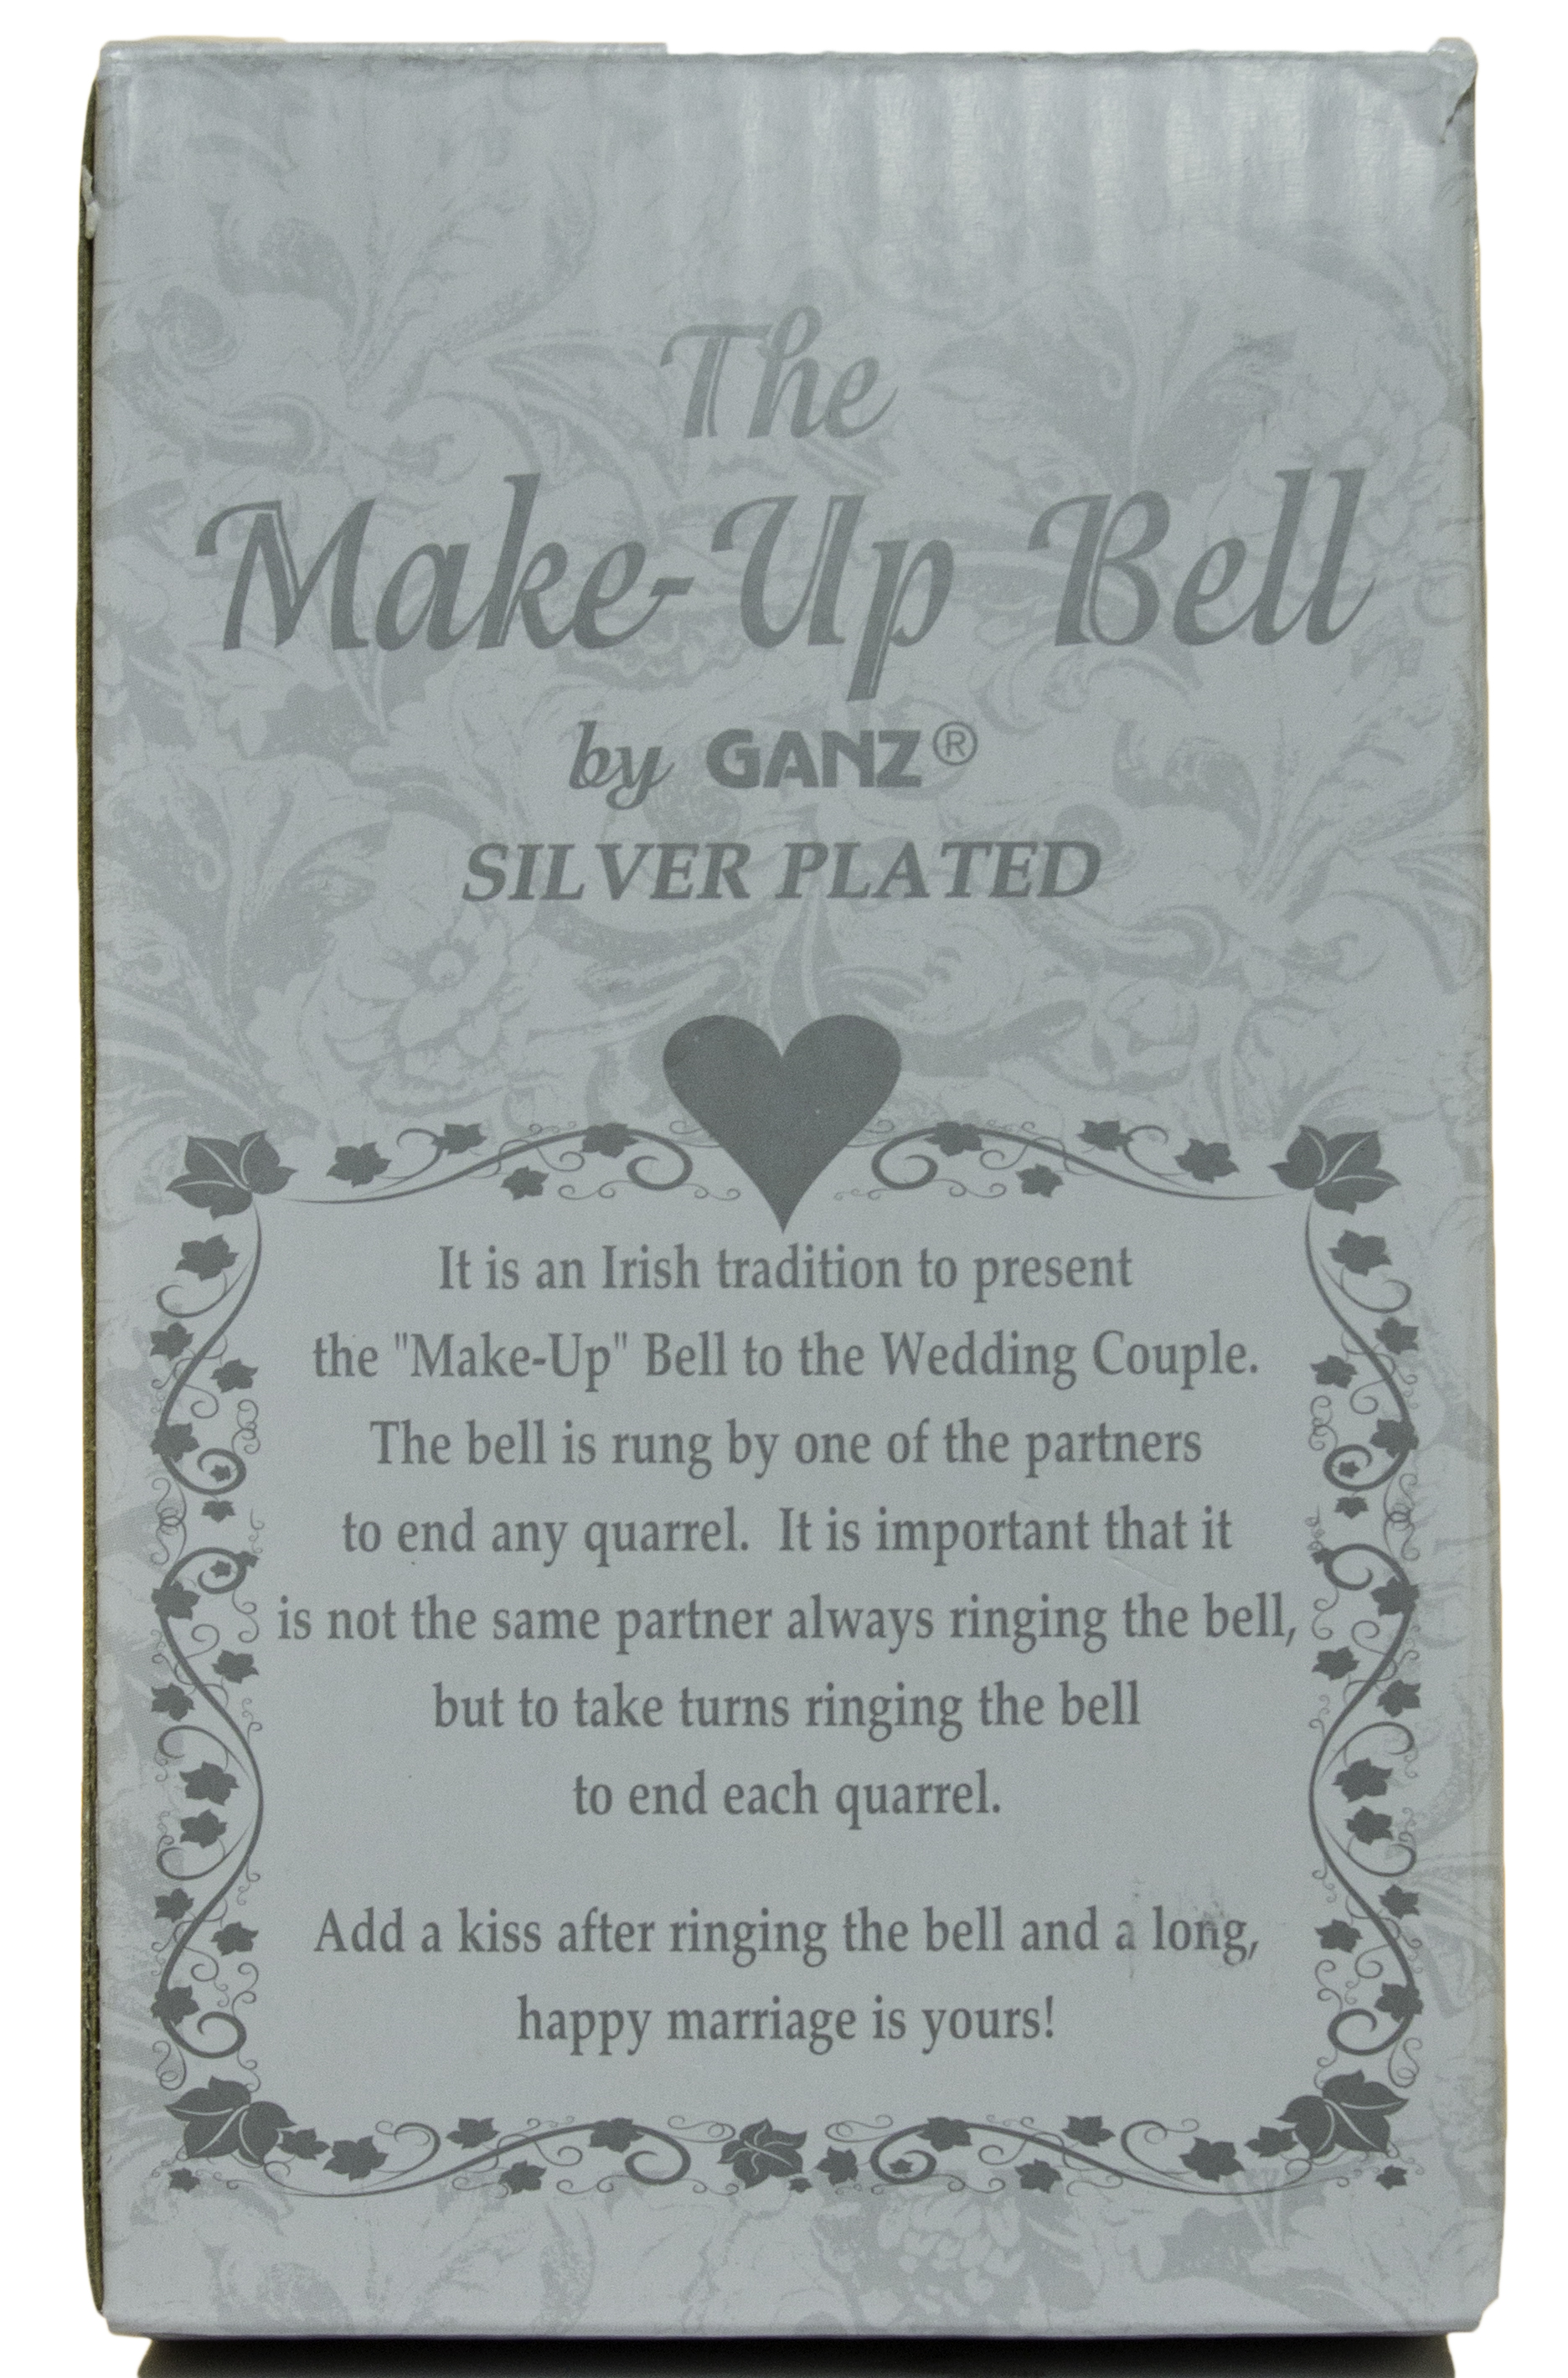 The Make-Up Bell: Couples Quarrel Ceasing Bell - By Ganz - image 3 of 3